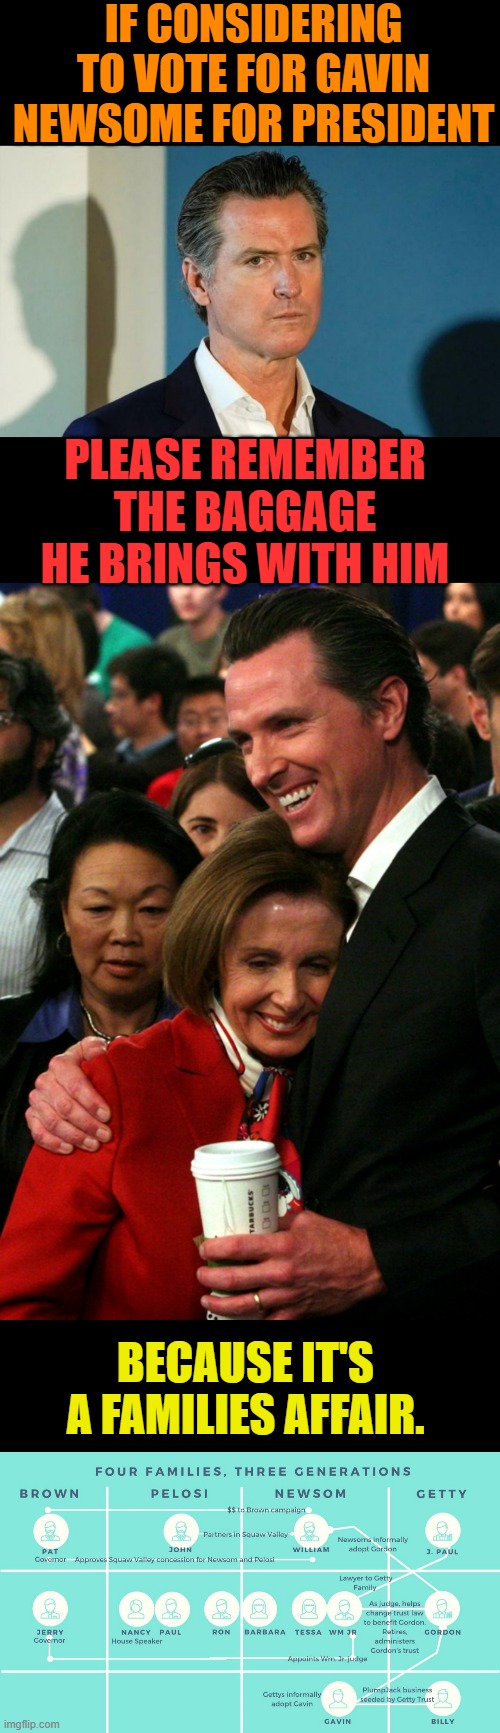 Don't Forget How Badly Nancy Pelosi Wanted To Be President When She Was Speaker Of The House | IF CONSIDERING TO VOTE FOR GAVIN NEWSOME FOR PRESIDENT; PLEASE REMEMBER THE BAGGAGE HE BRINGS WITH HIM; BECAUSE IT'S A FAMILIES AFFAIR. | image tagged in memes,politics,gavin,president,nancy pelosi,baggage | made w/ Imgflip meme maker